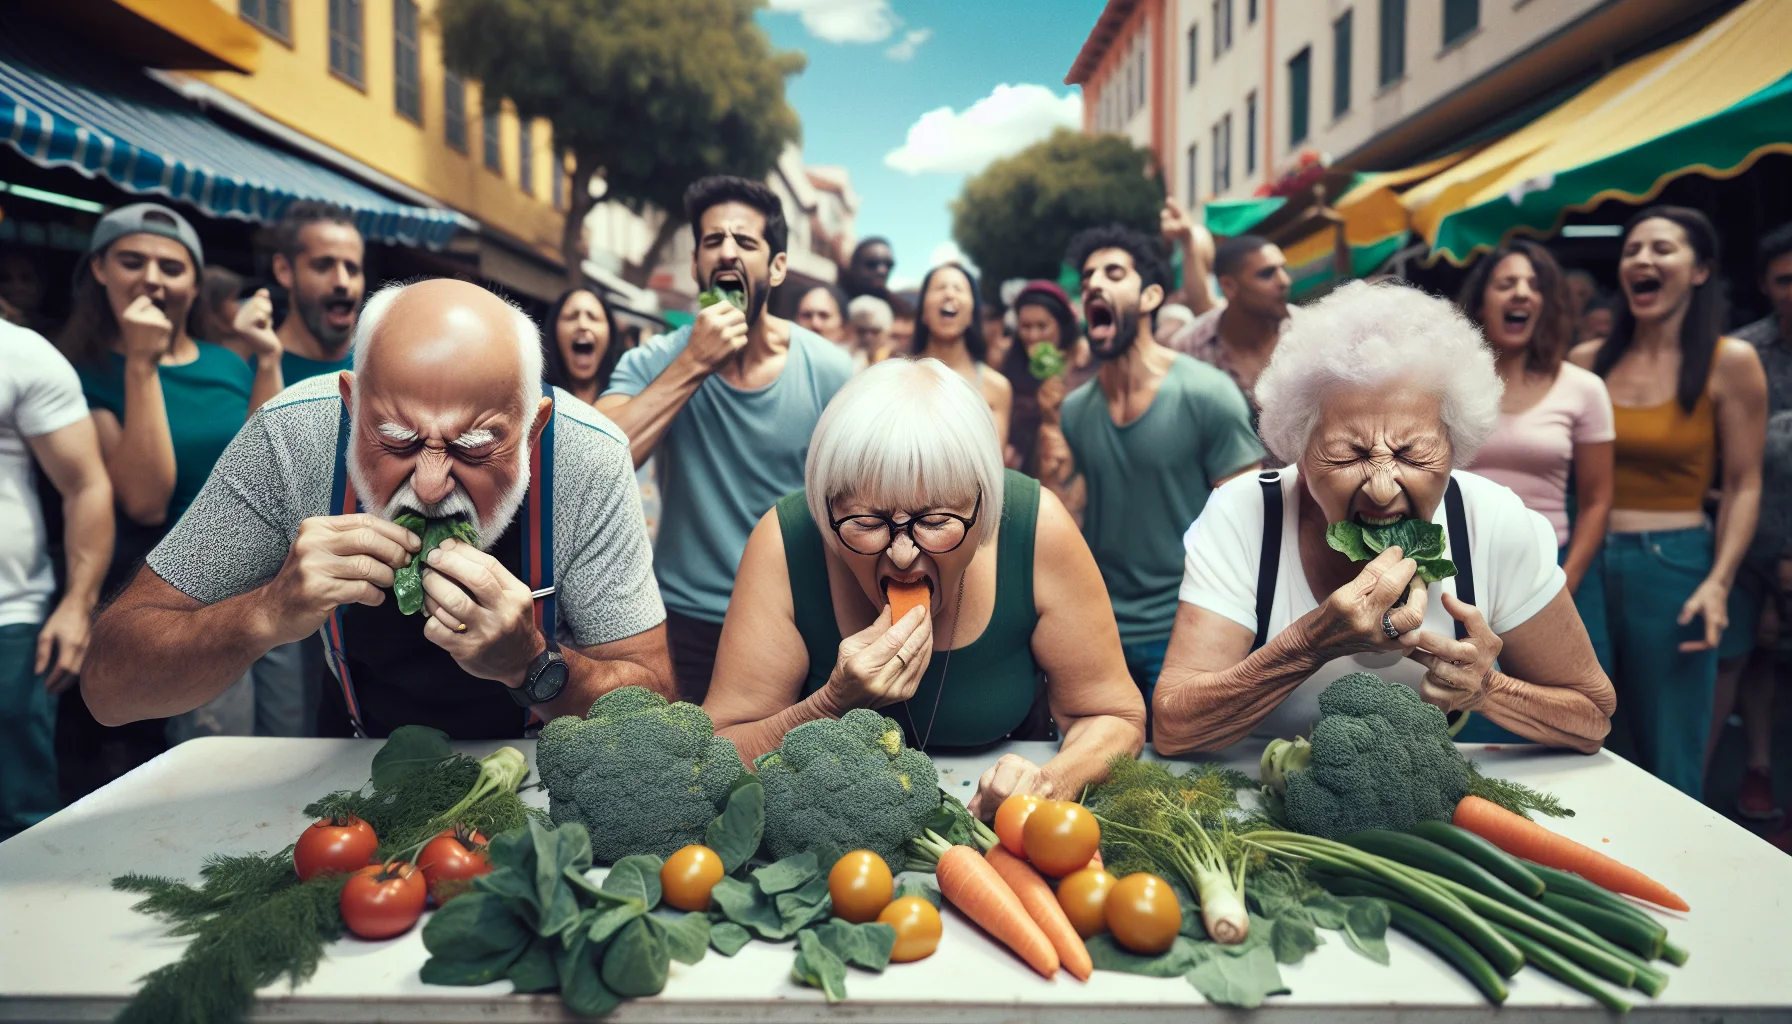 Generate a humorous, realistic image depicting an everyday scene at a vibrant farmer's market. In this scene, include three elderly individuals of diverse descents - a Hispanic man, a Middle-Eastern woman, and a Caucasian woman, all displaying signs of functional age. They are seen contesting in a friendly vegetable eating competition, surrounded by an assortment of fruits and vegetables signifying a healthy diet. Their expressions are of determination and hilarity mix, as they munch on large, leafy stalks of broccoli, carrots and tomatoes, with spectators around them roaring in laughter.